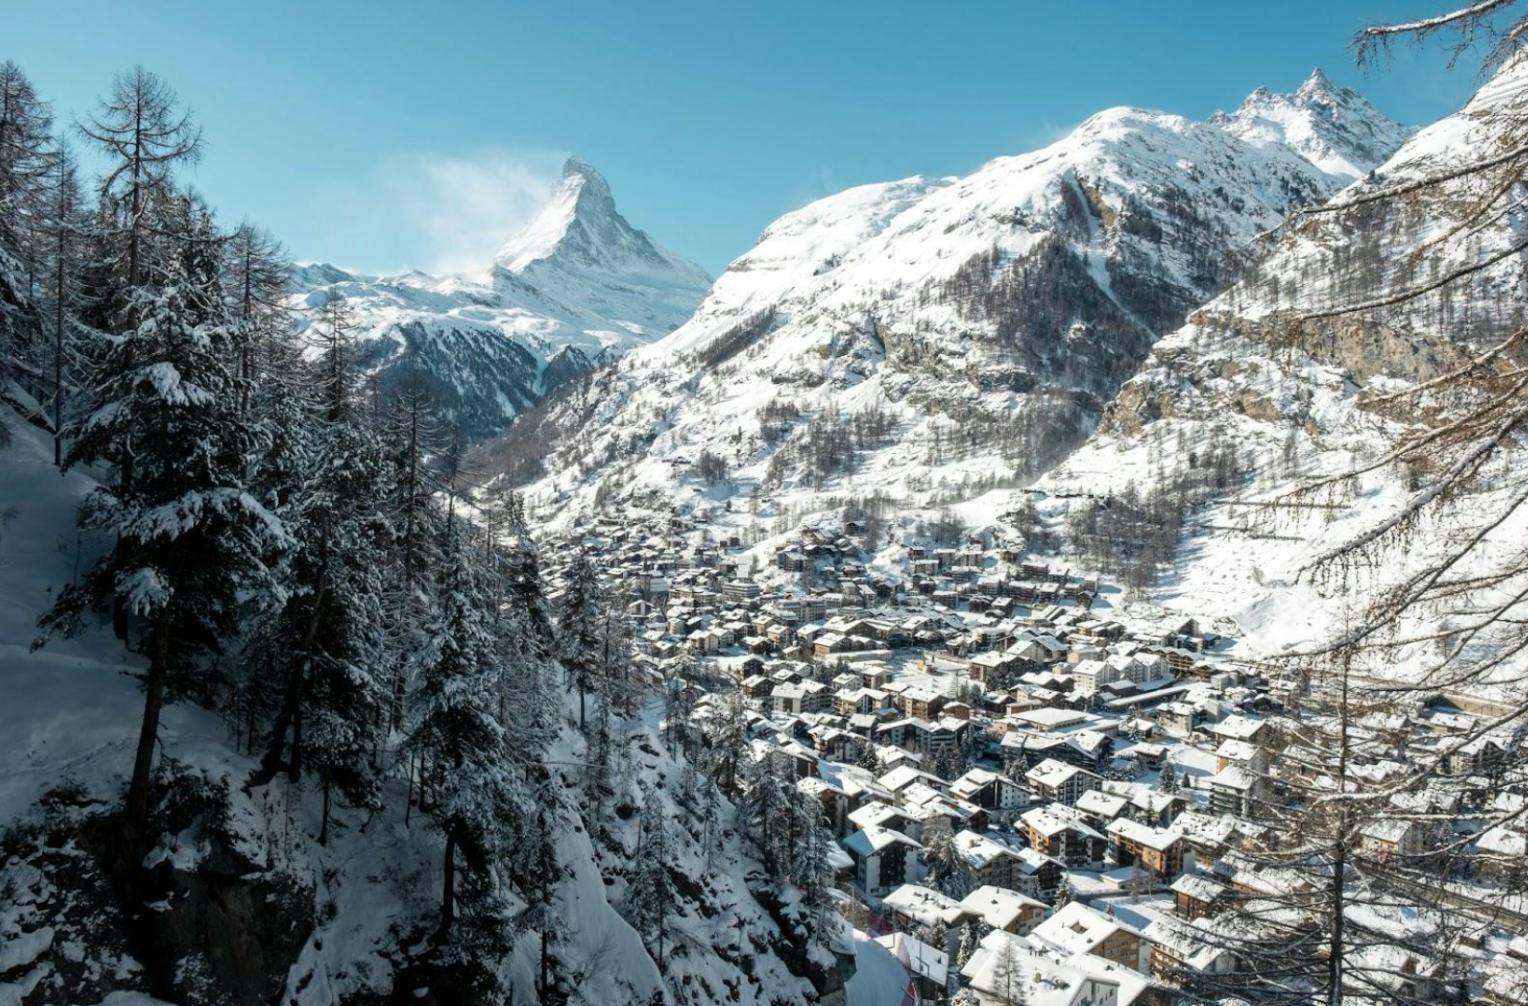 A snowy town with the Matterhorn in the background. 